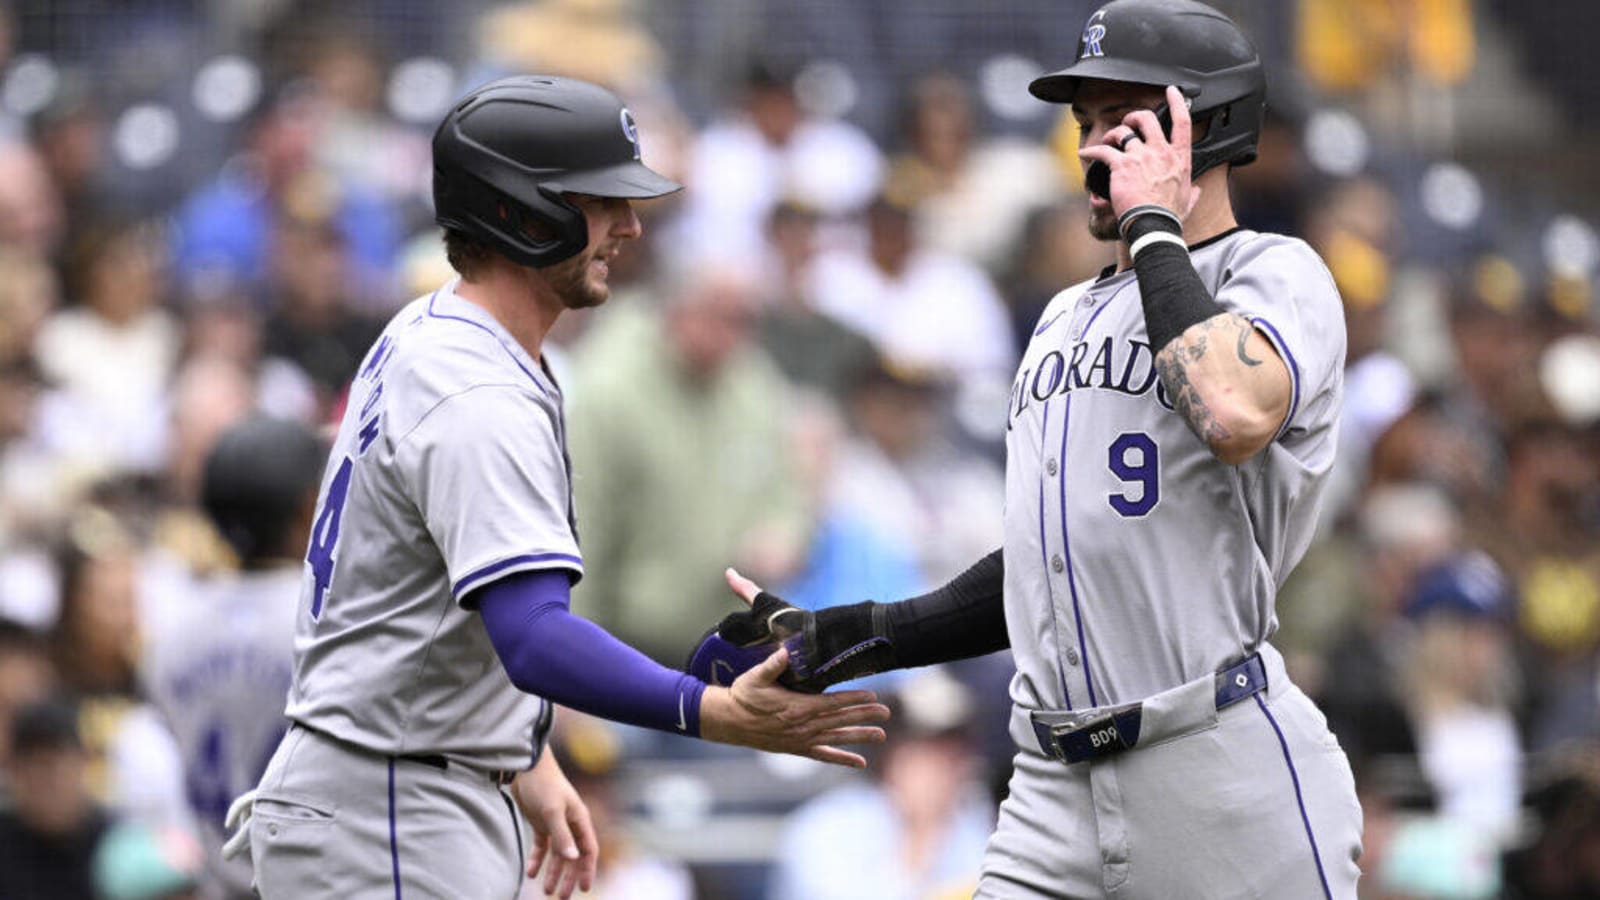 Rockies Offense Led by a Veteran and Second Year Player